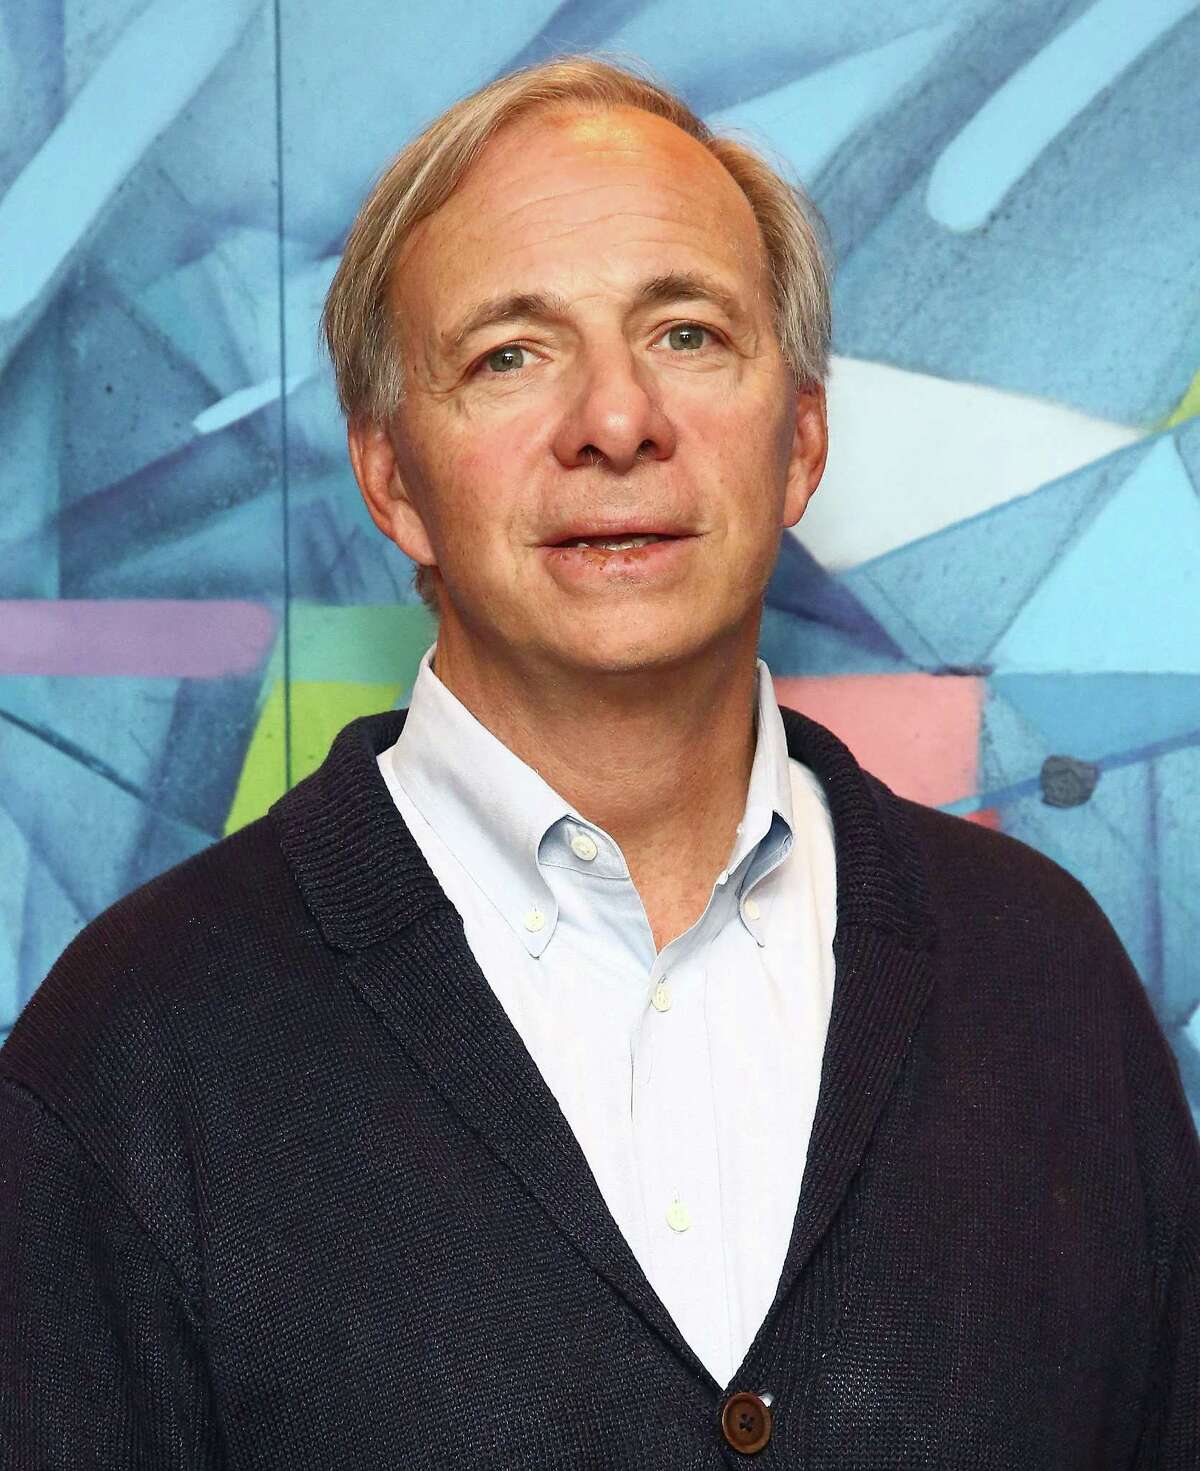 Ray Dalio - Greenwich Rank: 57 out of 2,150 | Net worth: $18.4B | Industry: Hedge funds Source: Forbes